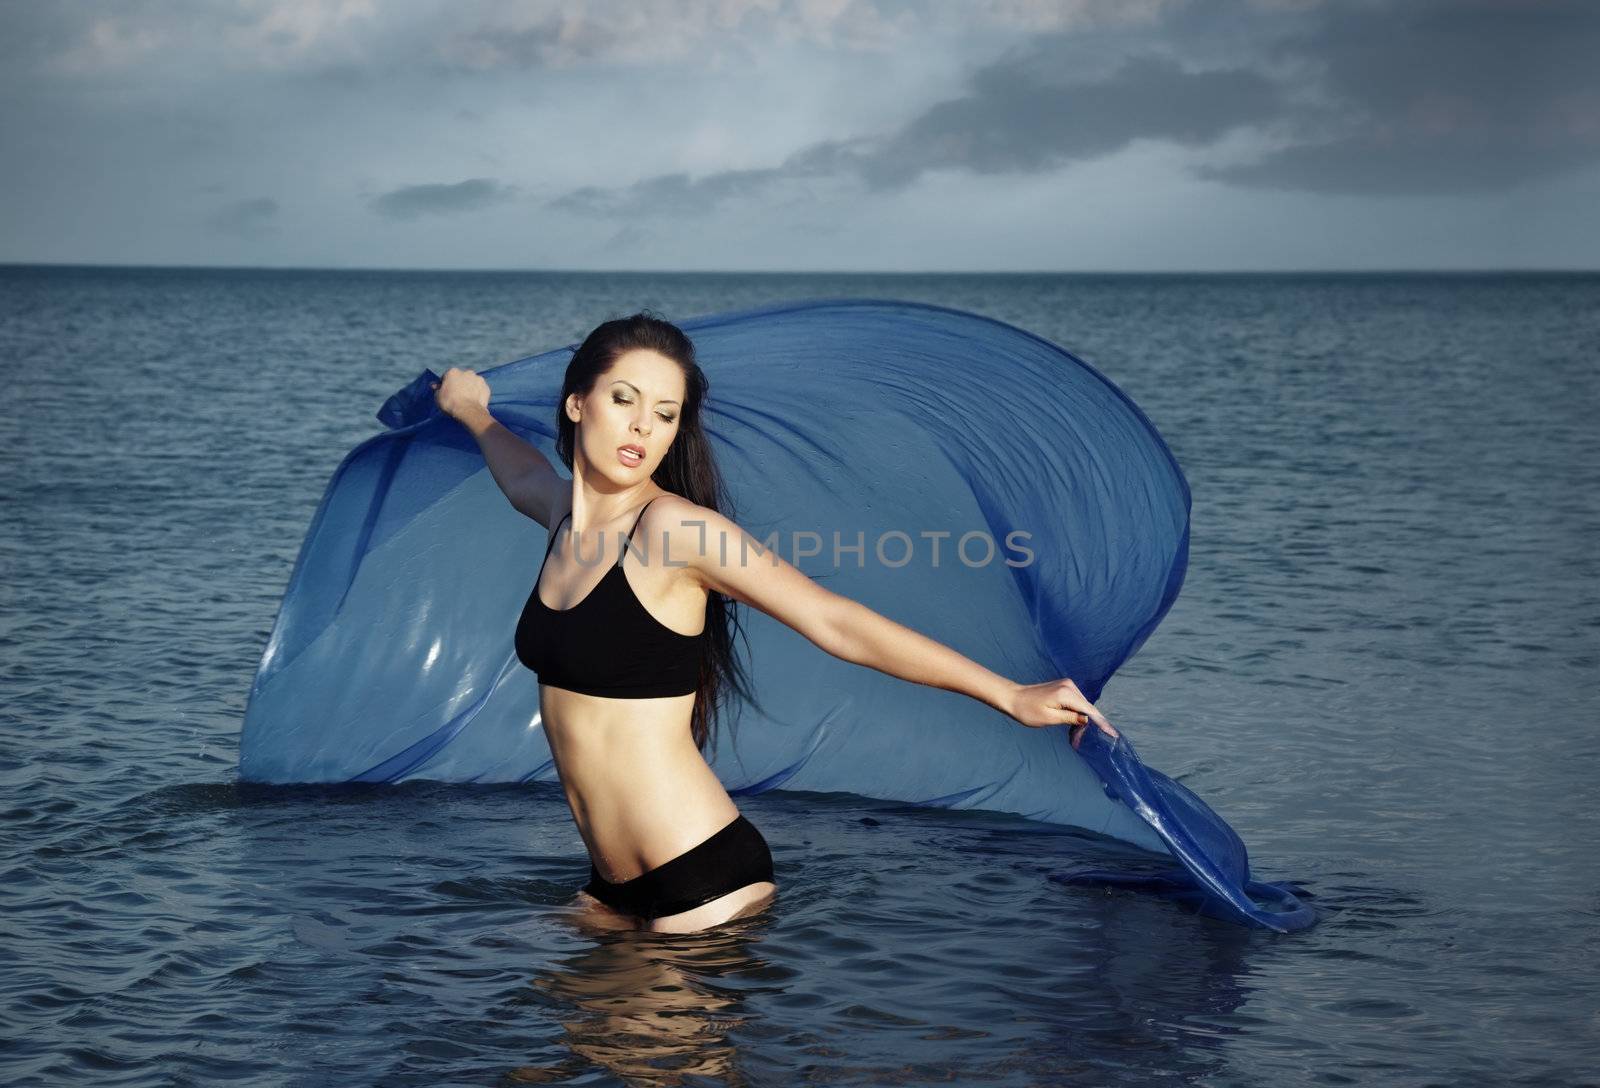 Lady with perfect body dancing in the sea with blue fabric